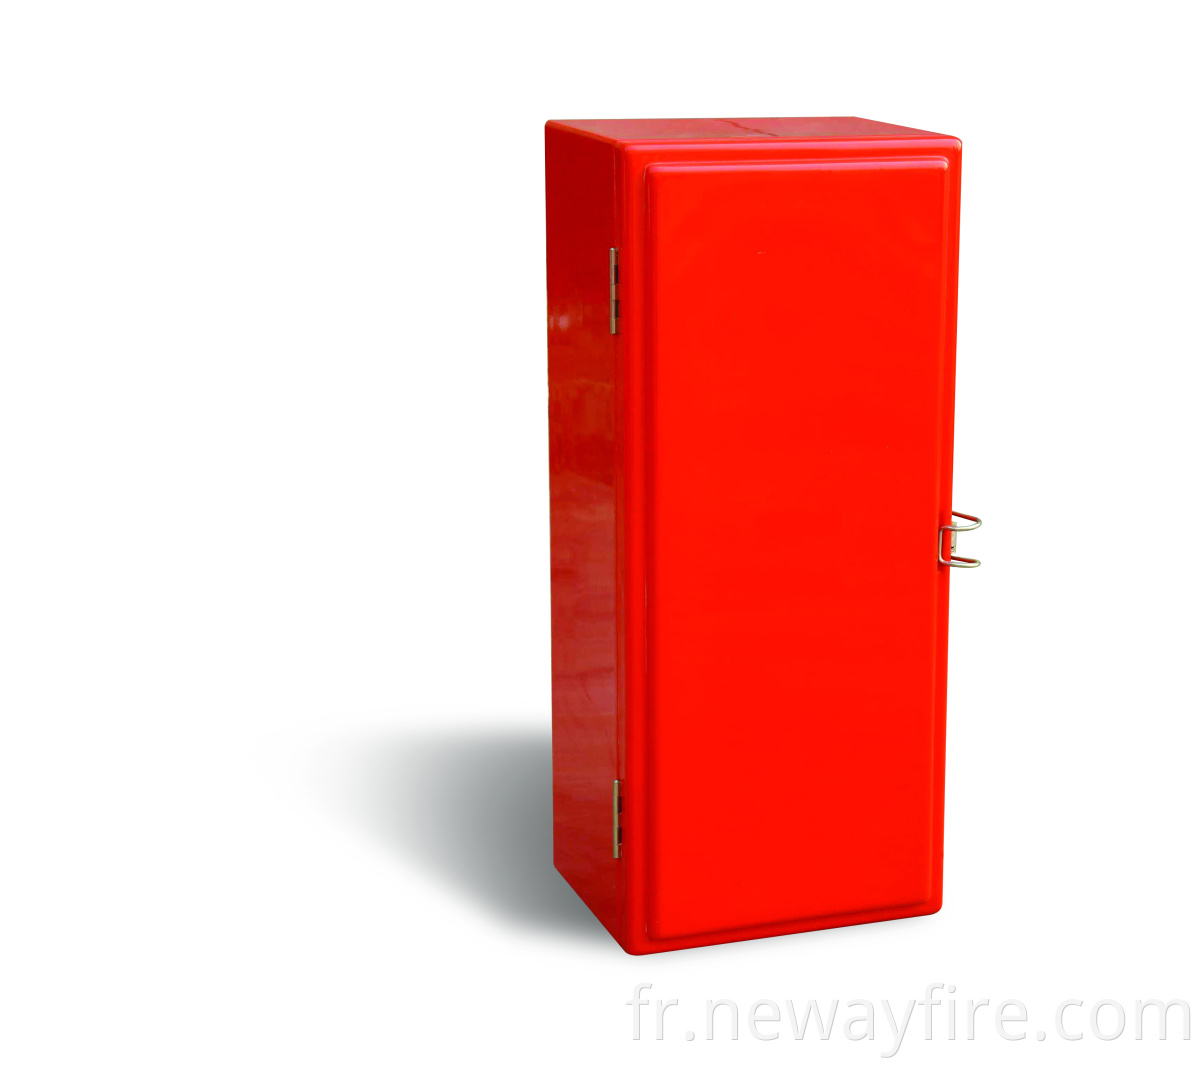 Poly Vinyl Chloride FIRE CABINET